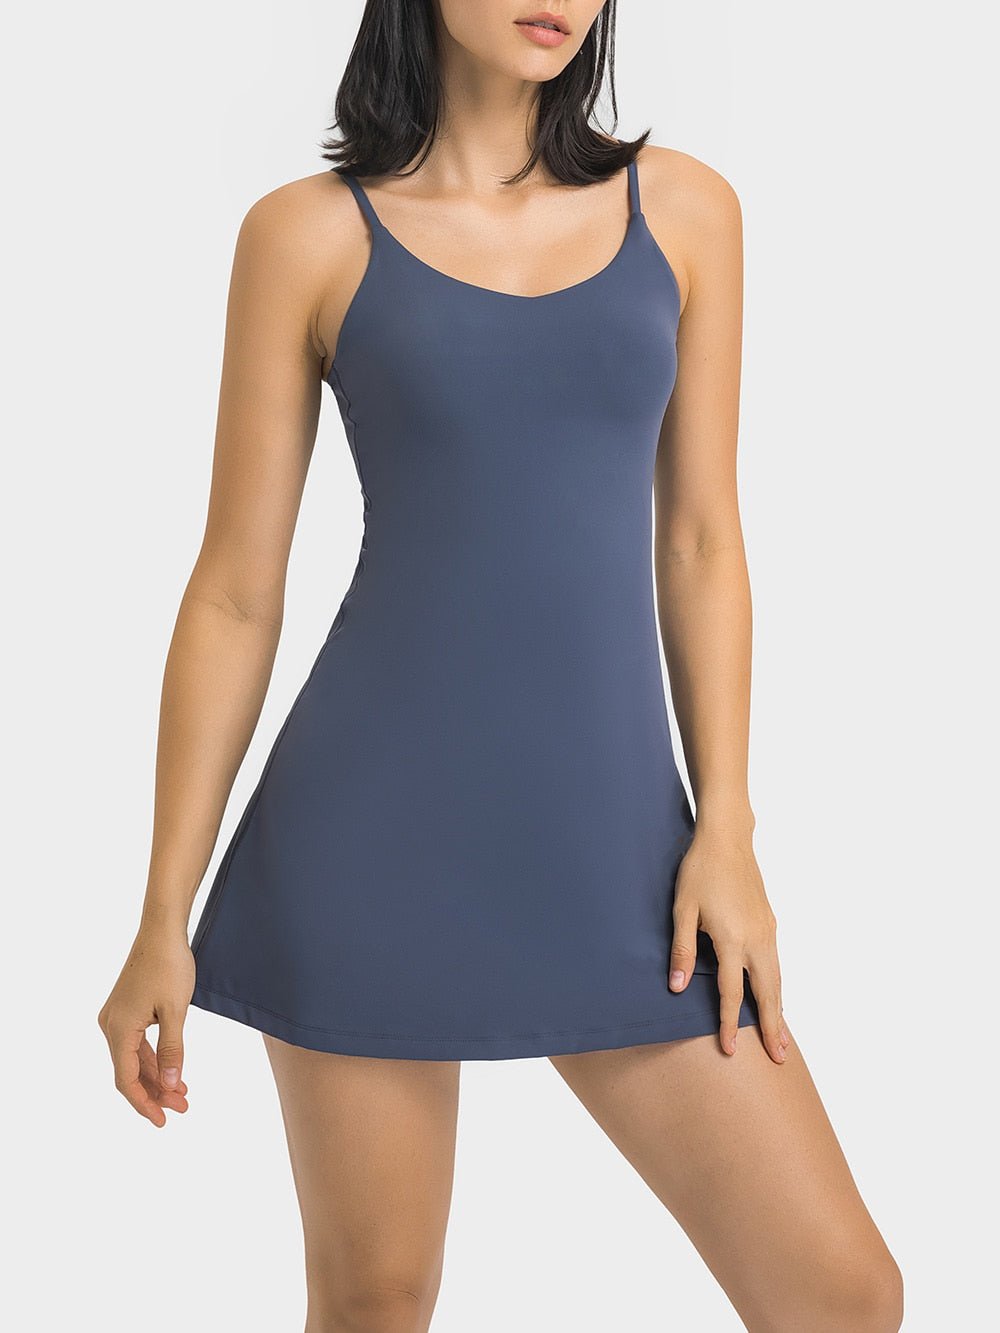 Cheap Womens Tennis Dress Workout Mini Dress With Built In Bra And